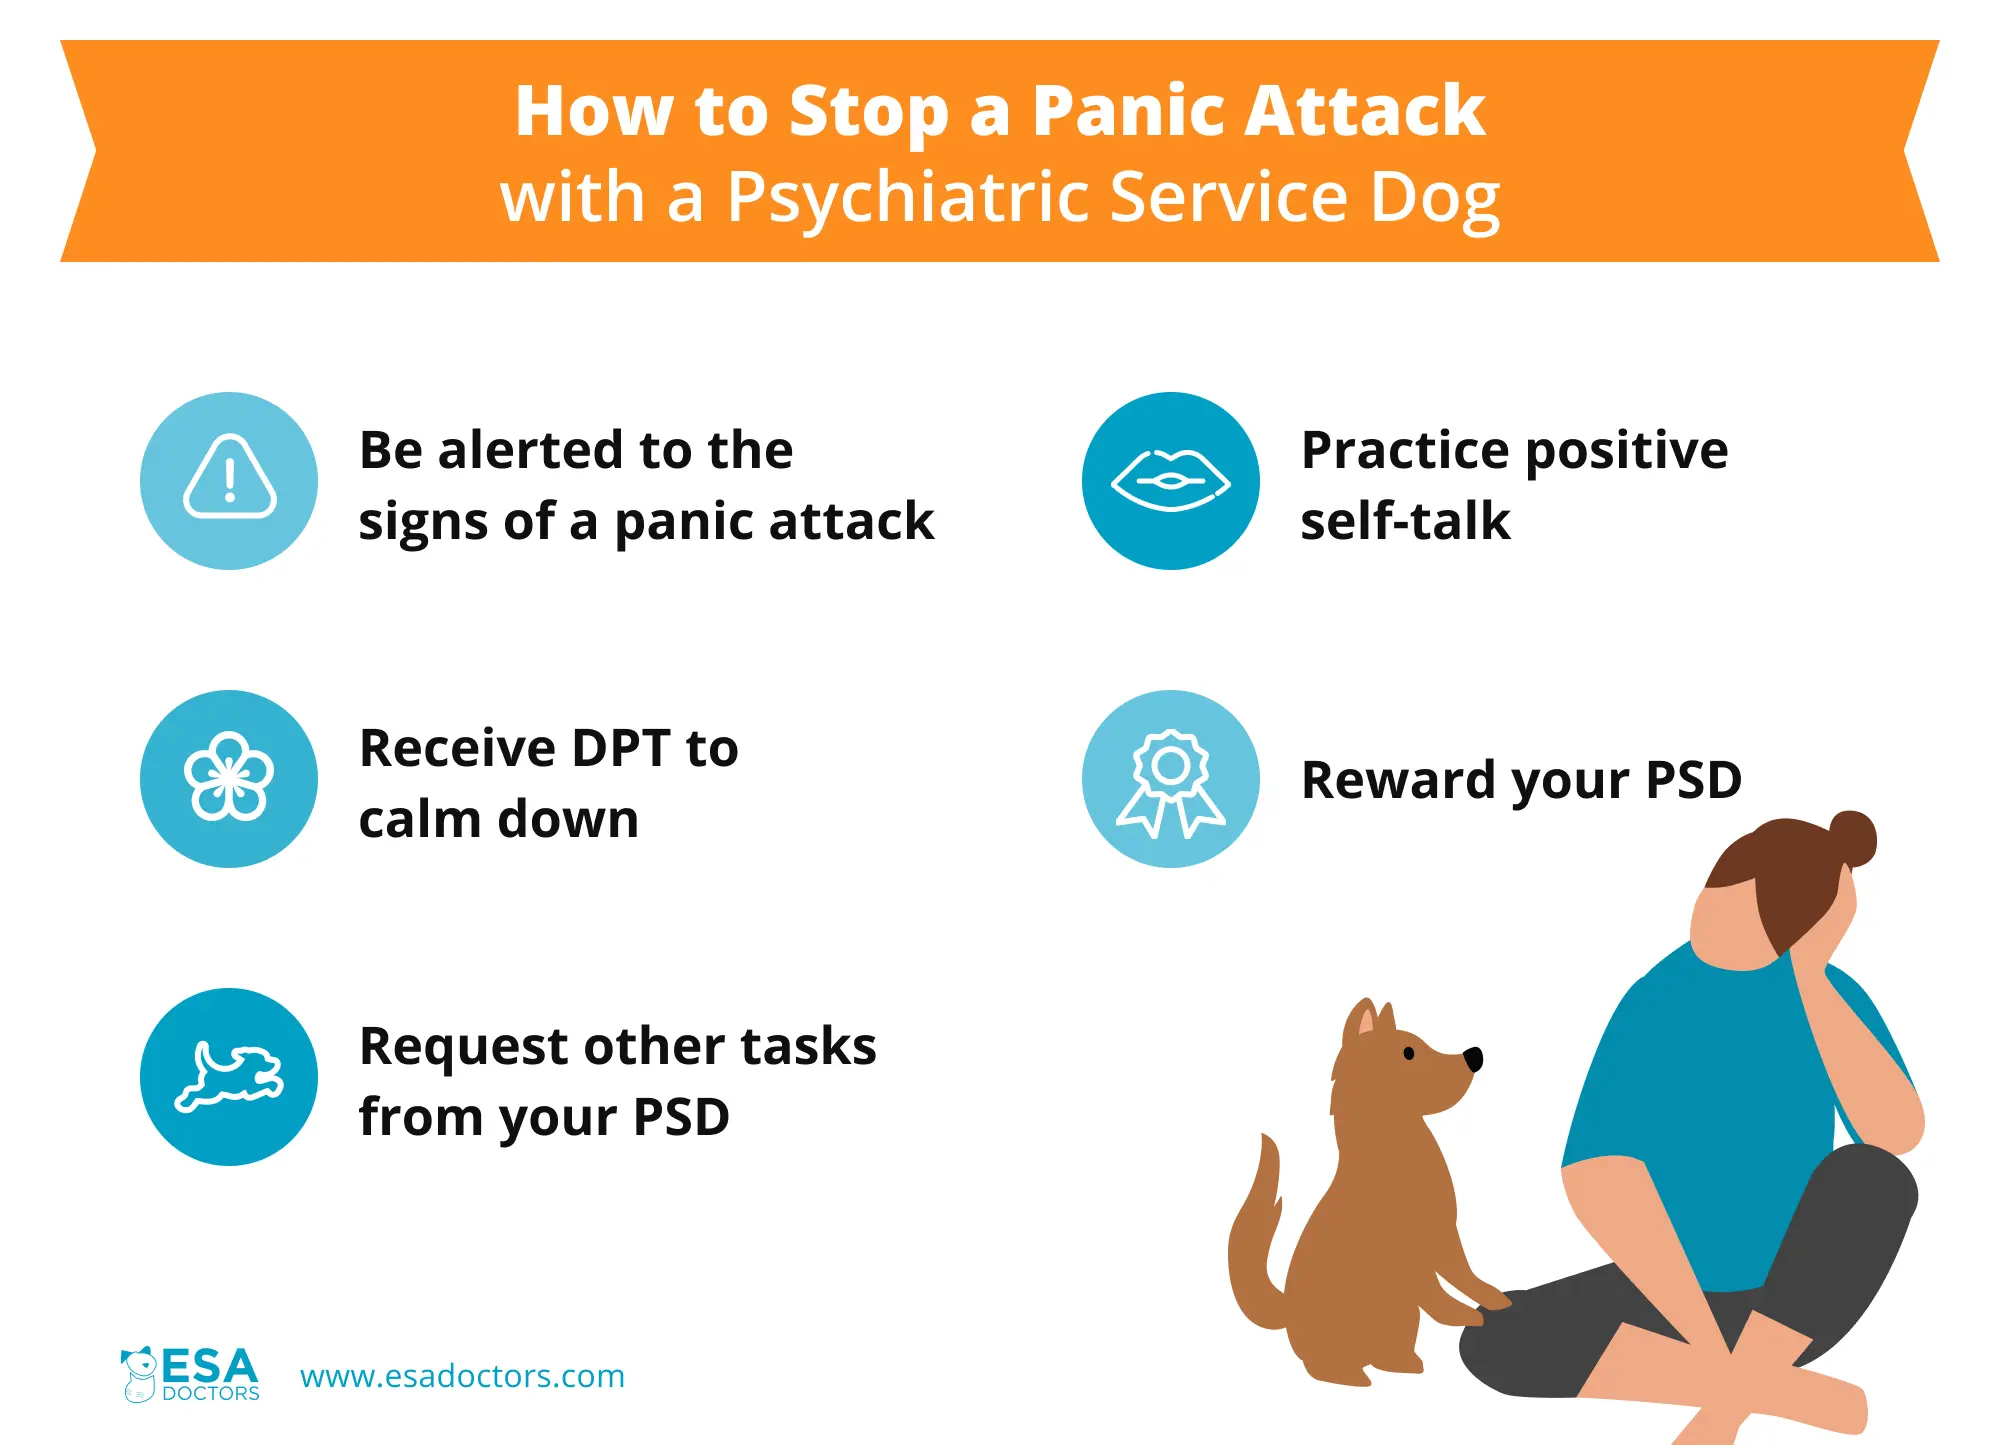 How to Stop a Panic Attack with a PSD - Infographic